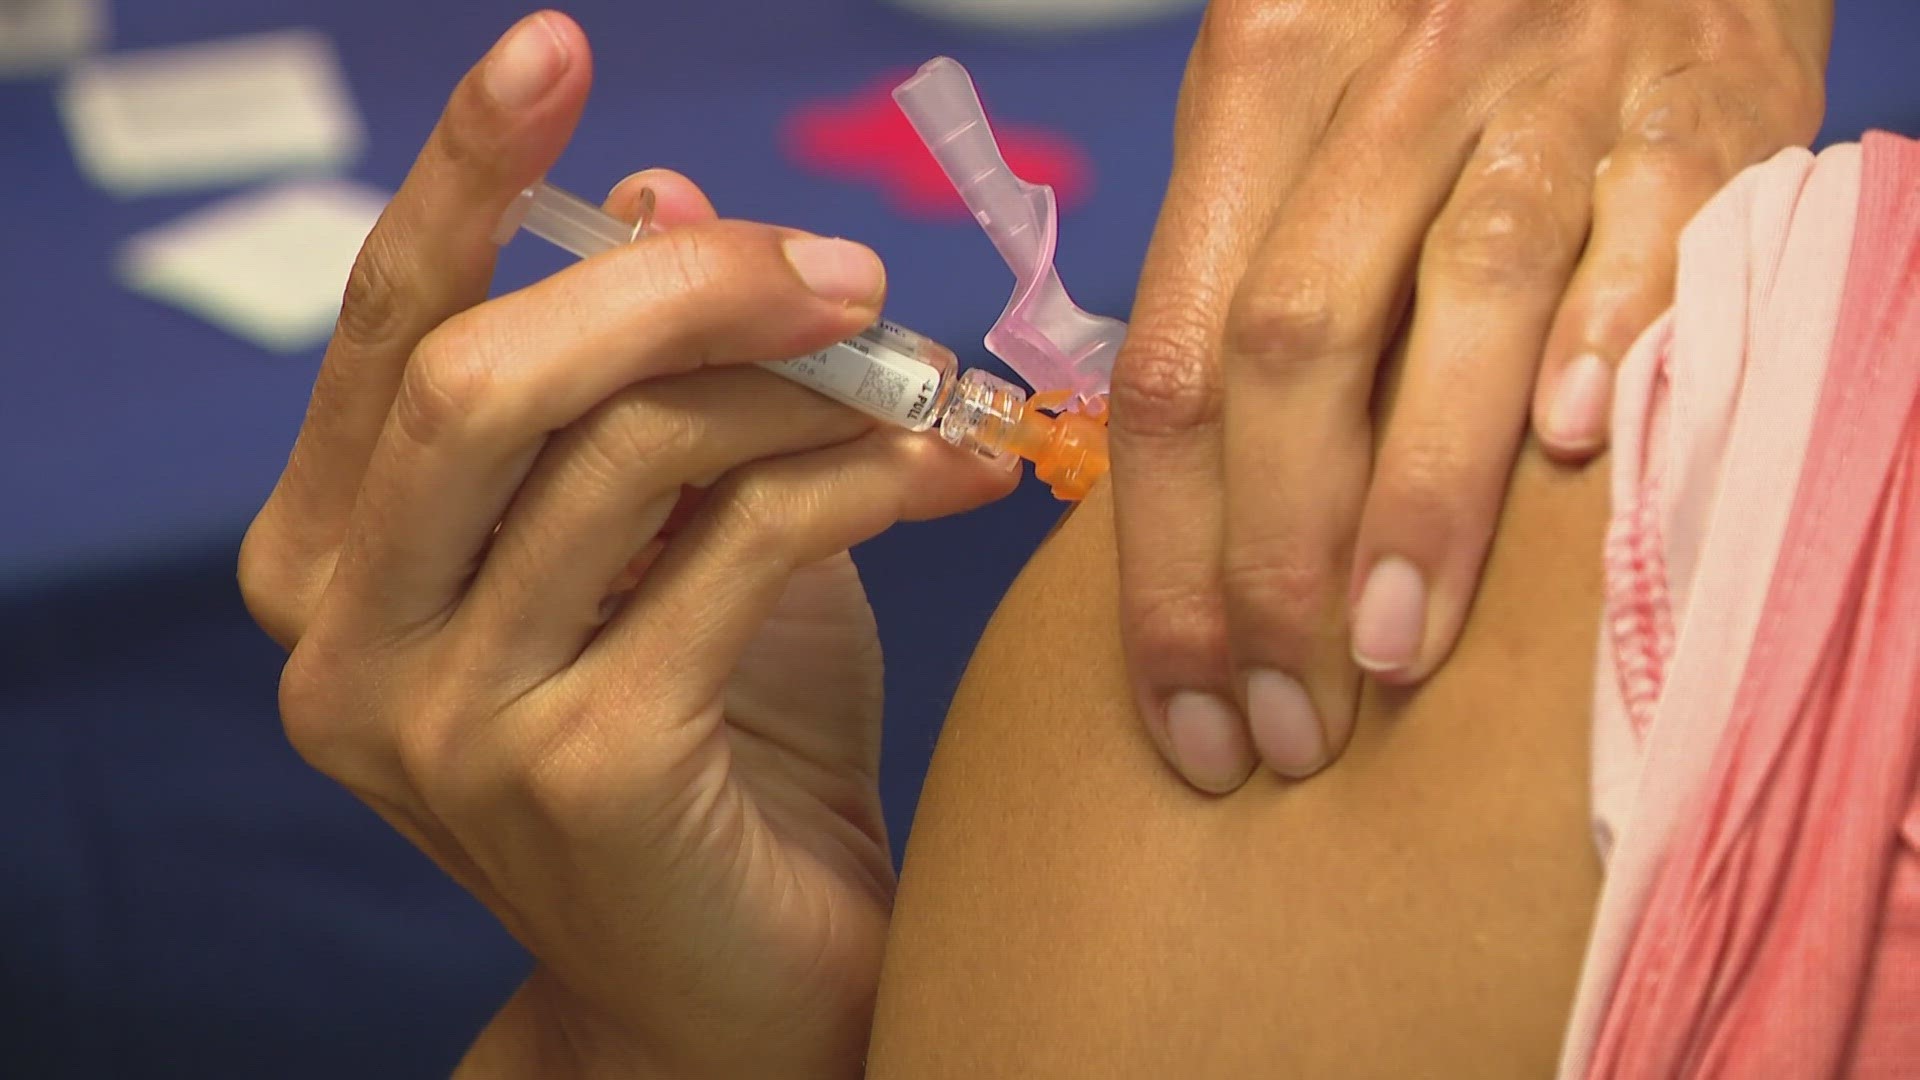 A Riley spokesperson says it's important to get the flu shot every year to protect yourself and to protect others.